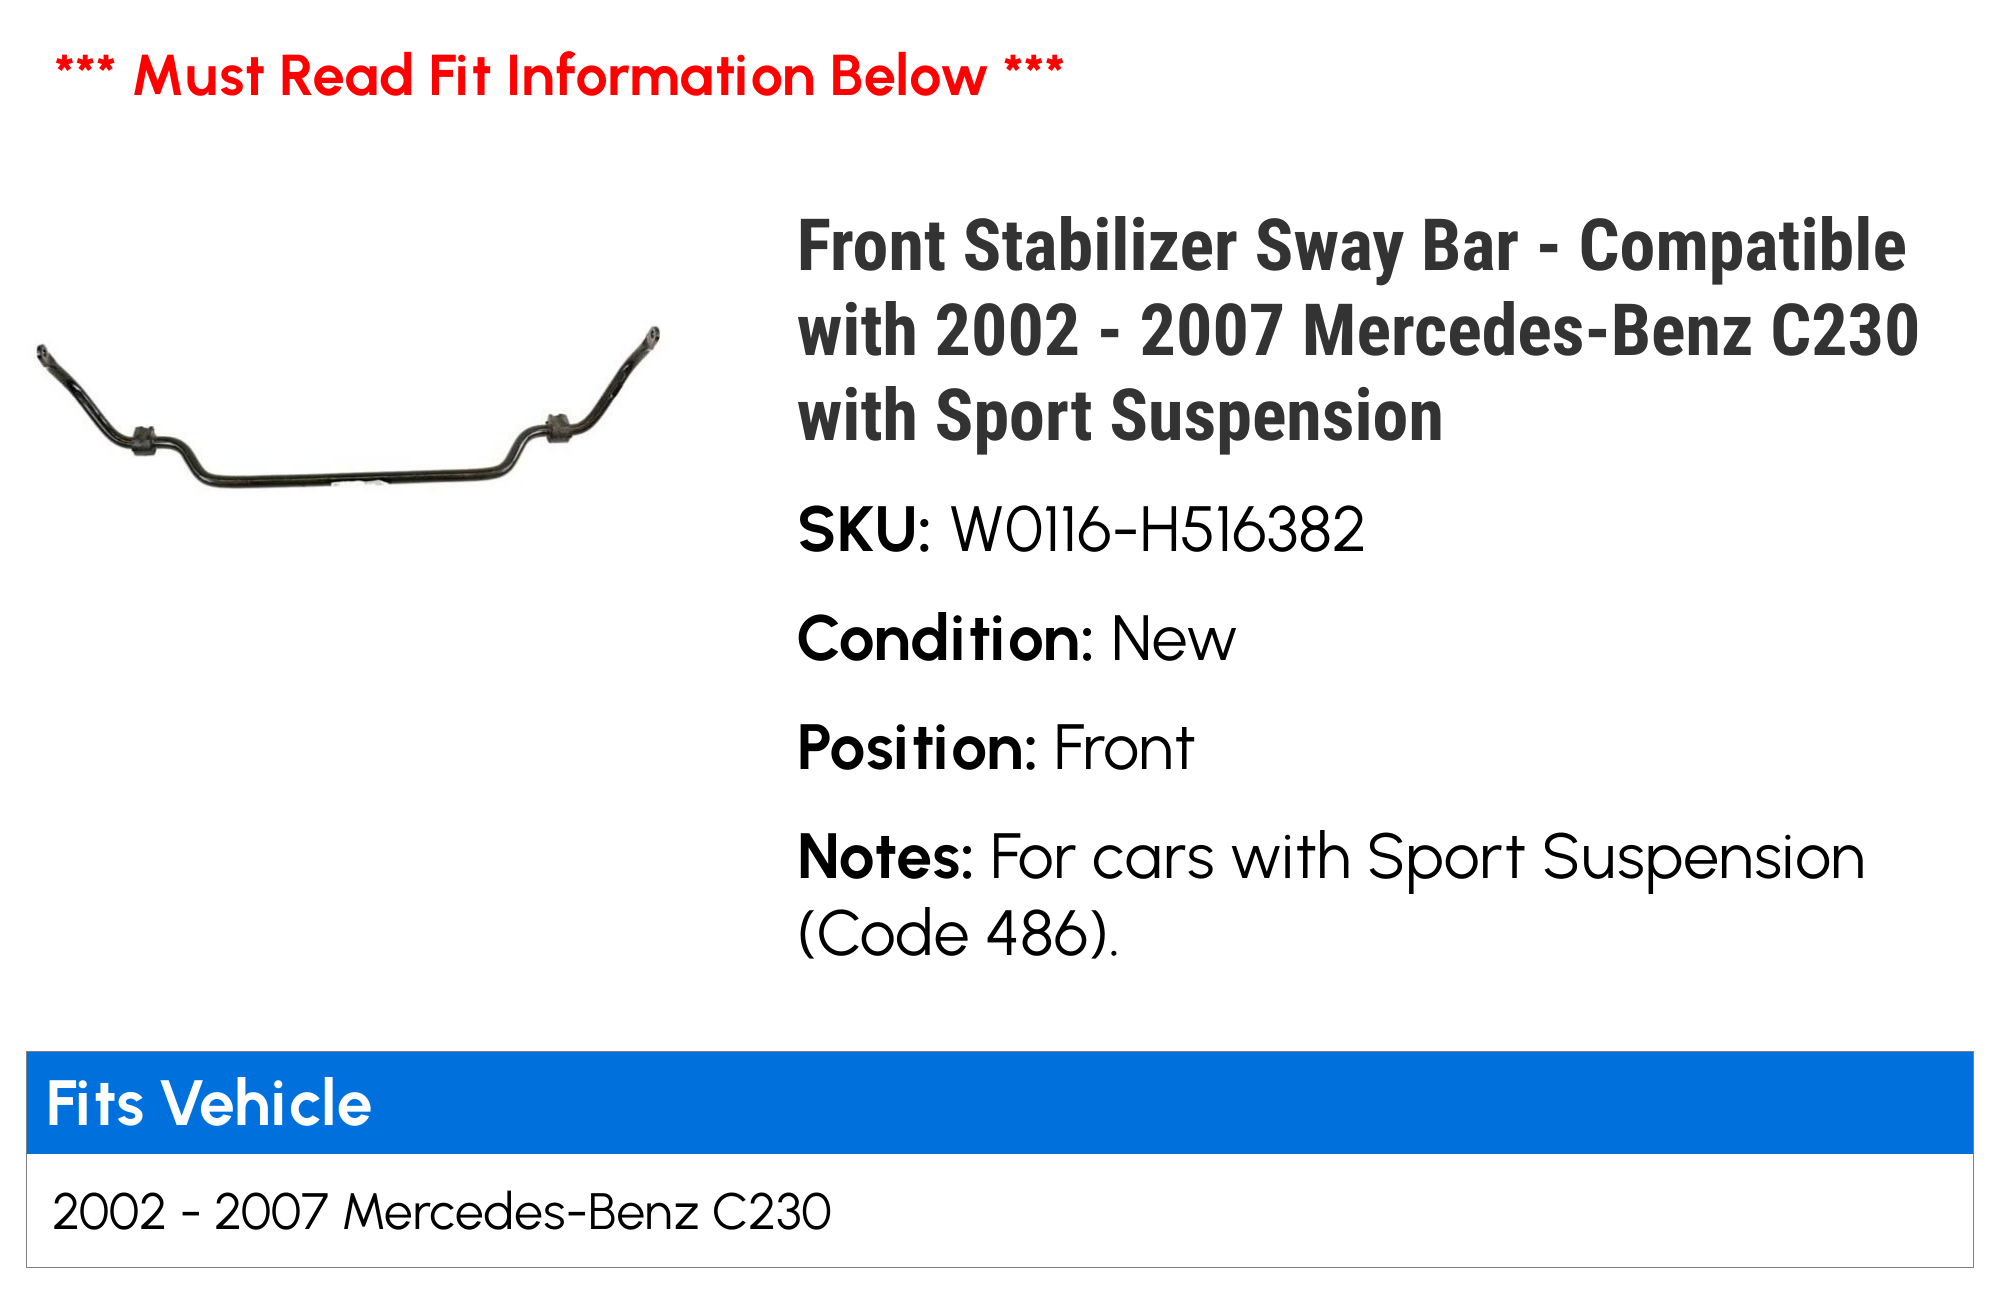 Front Stabilizer Sway Bar - Compatible with 2002 - 2007 Mercedes-Benz C230 with Sport Suspension 2003 2004 2005 2006 - image 2 of 2